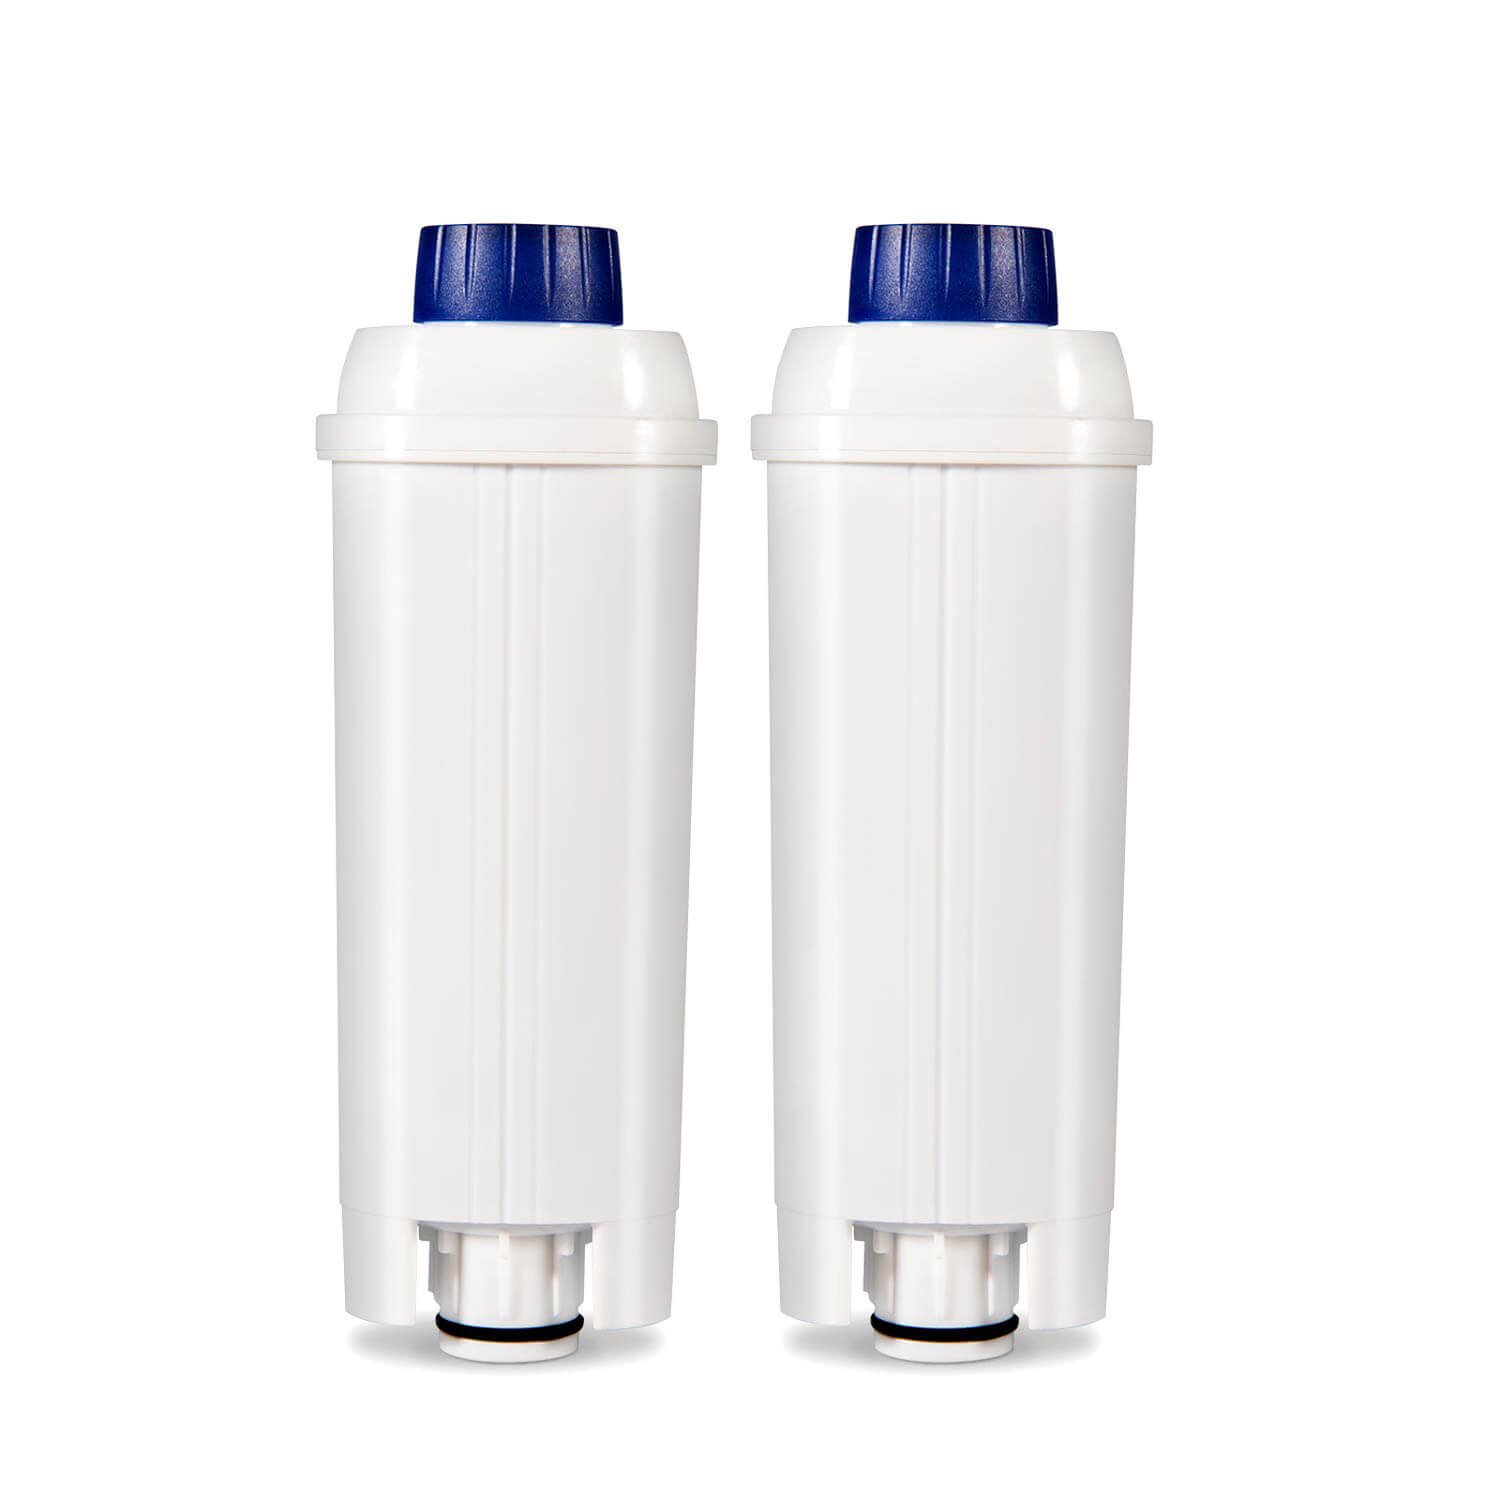 water filter dlsc002 partscome